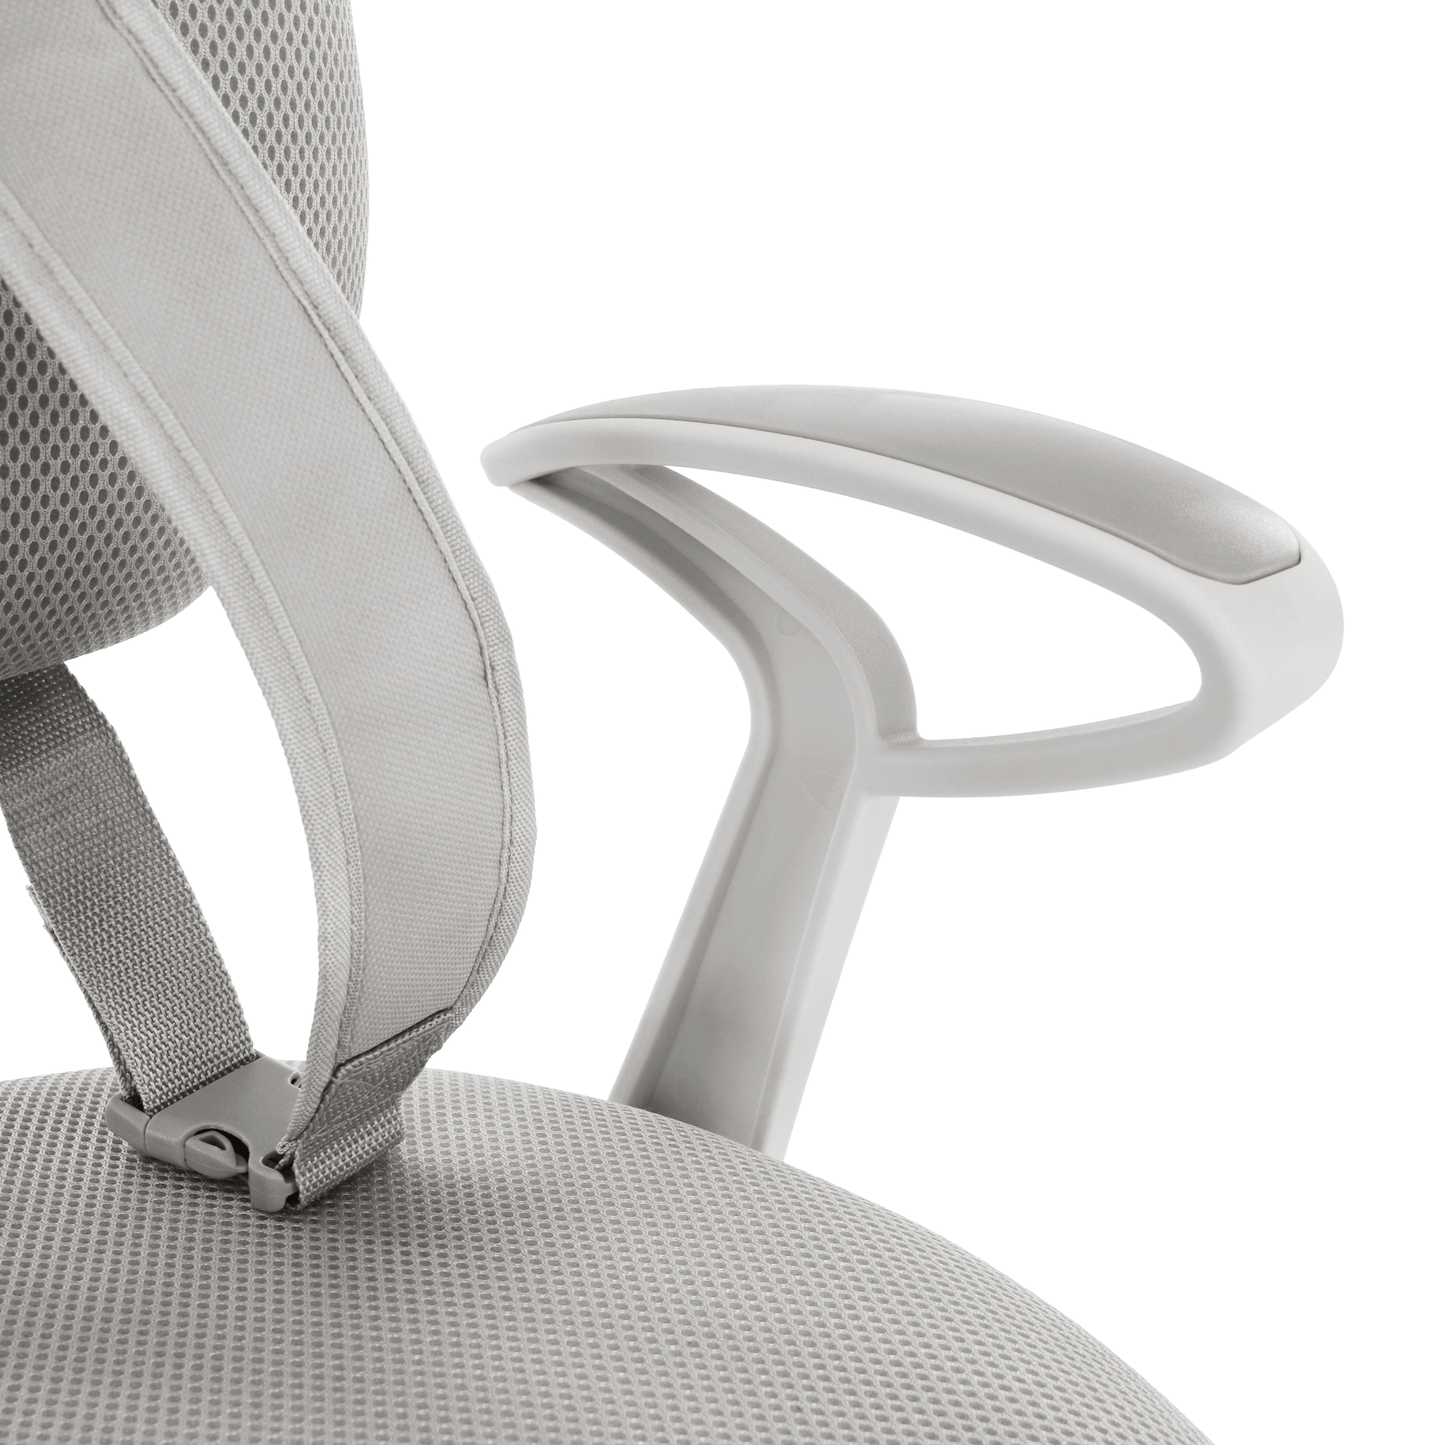 Adjustable chair with footrest and straps, grey/white, ANAIS